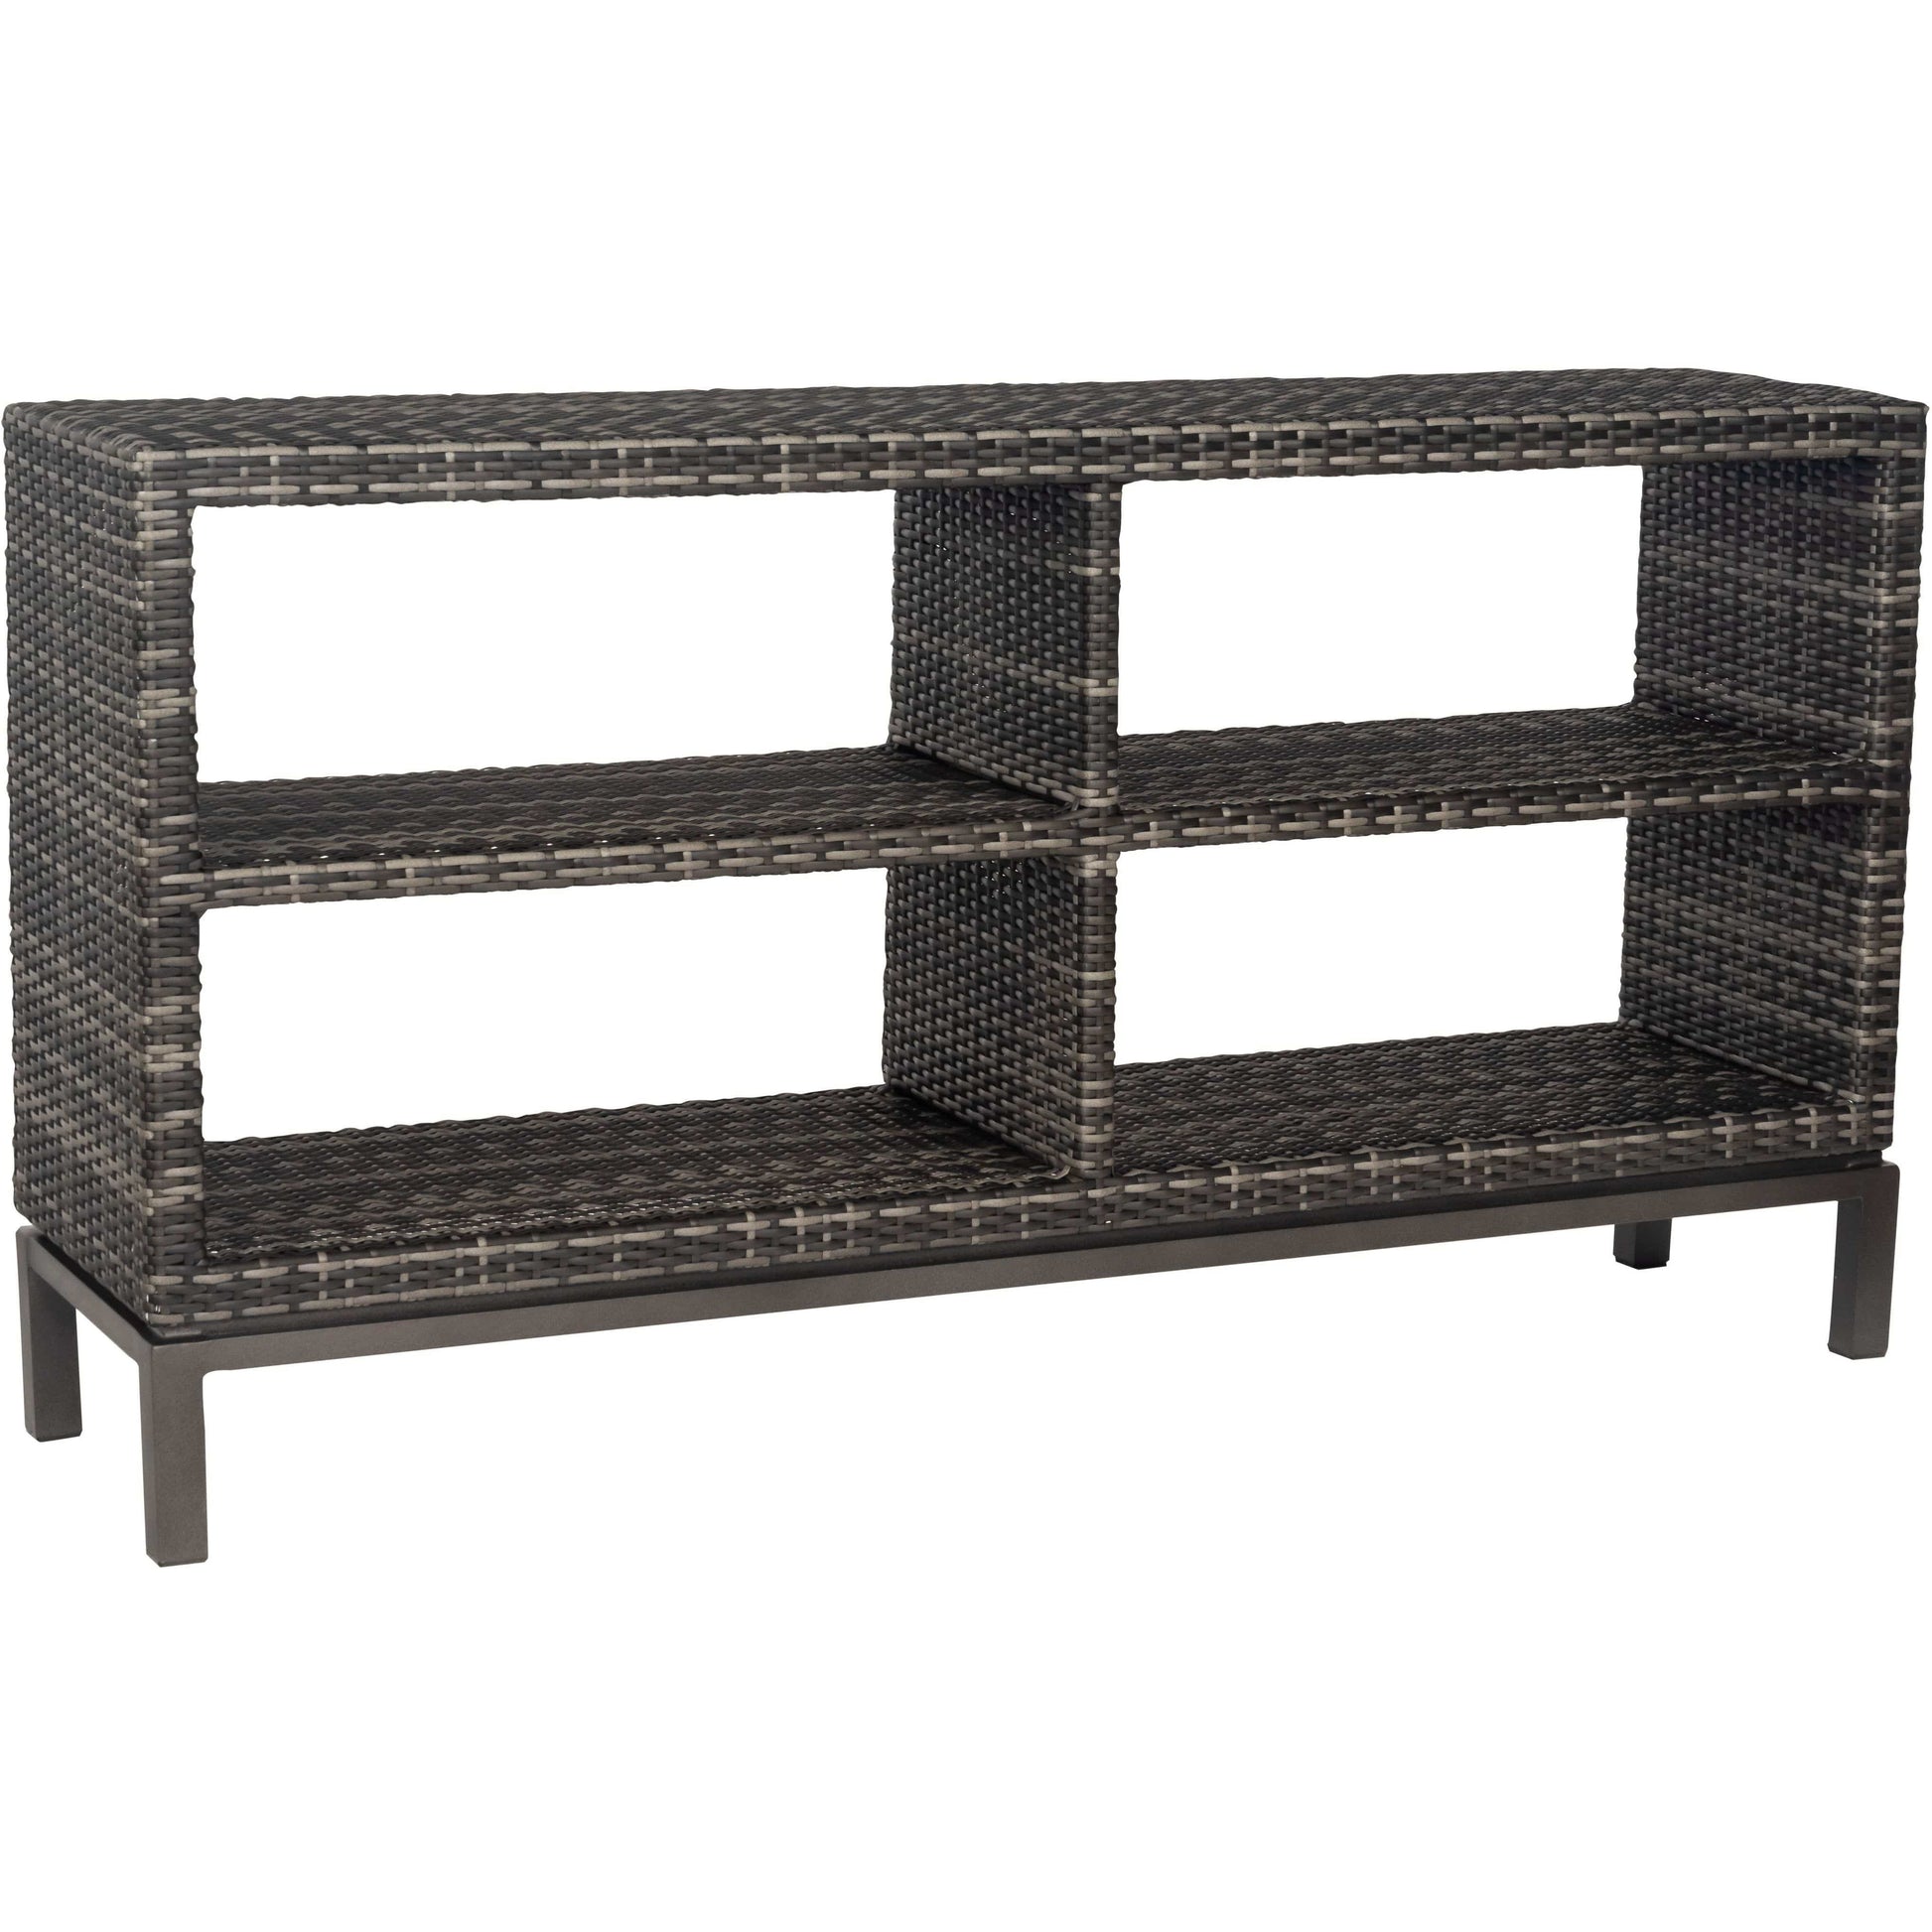 Storage Unit S504311 Woodard Outdoor Patio | Canaveral Collection Seating Woodard 